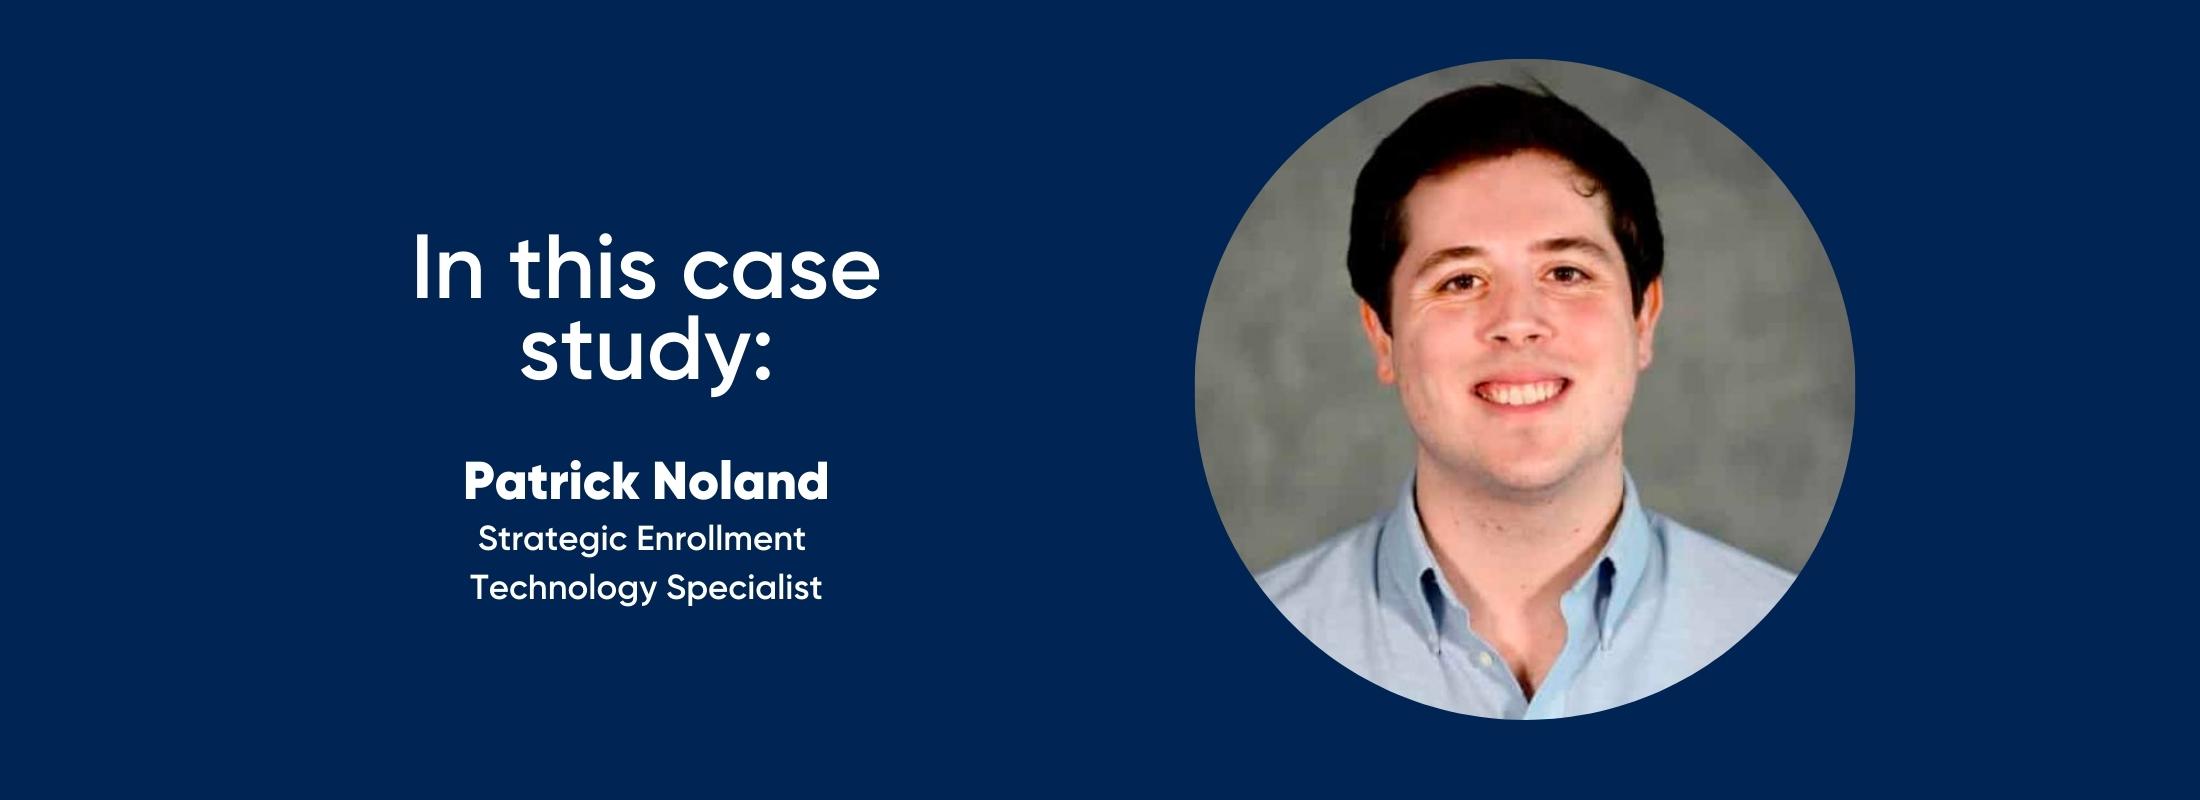 in this case study: Patrick Noland, Strategic Enrollment Technology Specialist